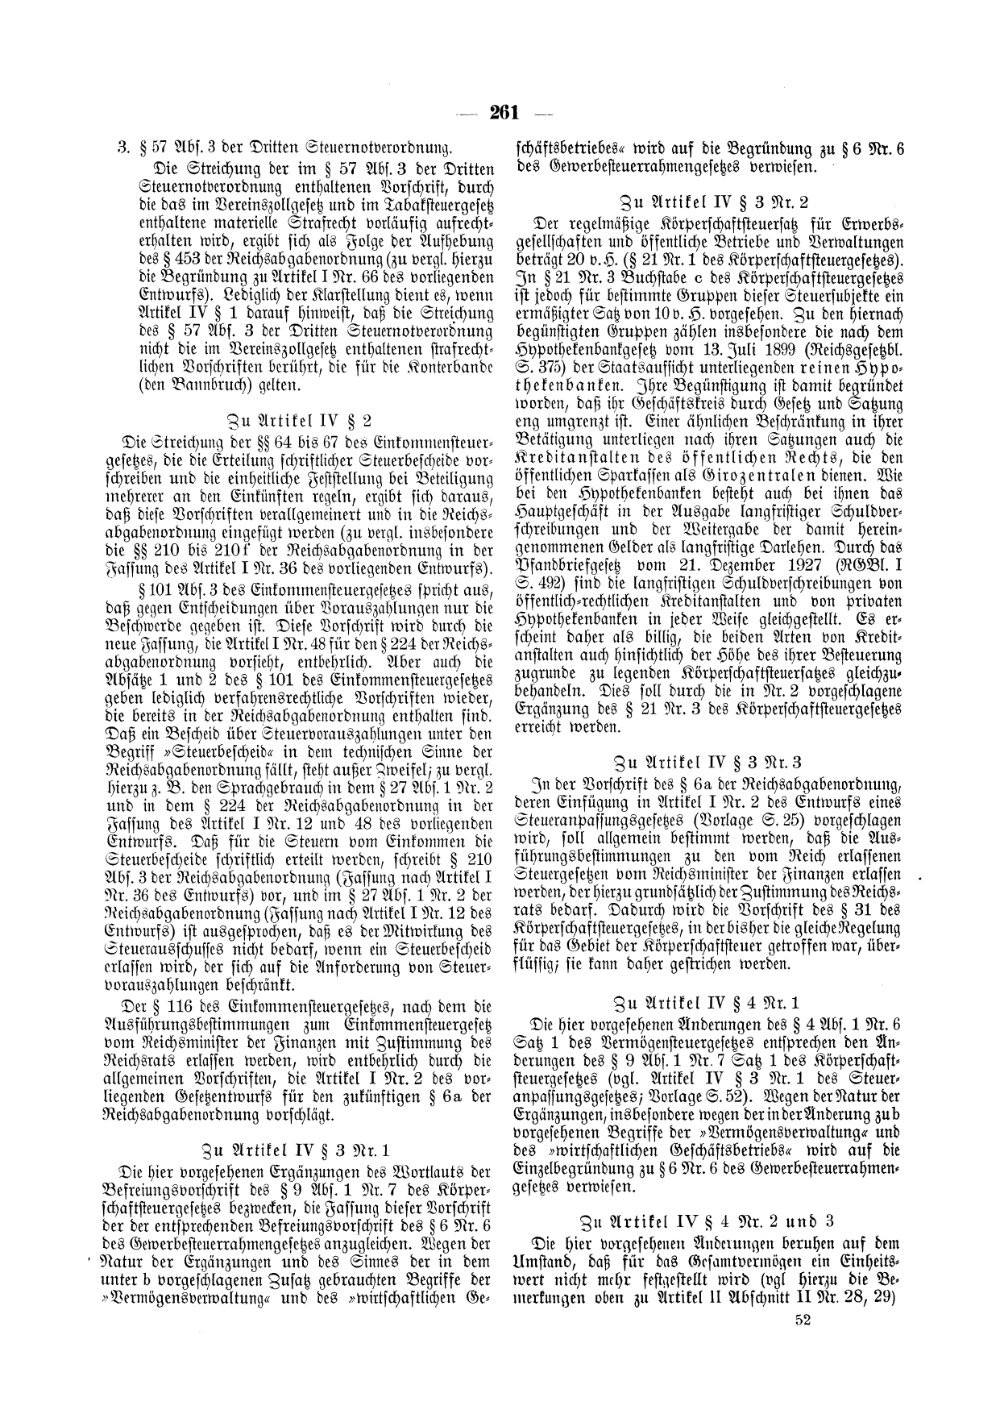 Scan of page 261